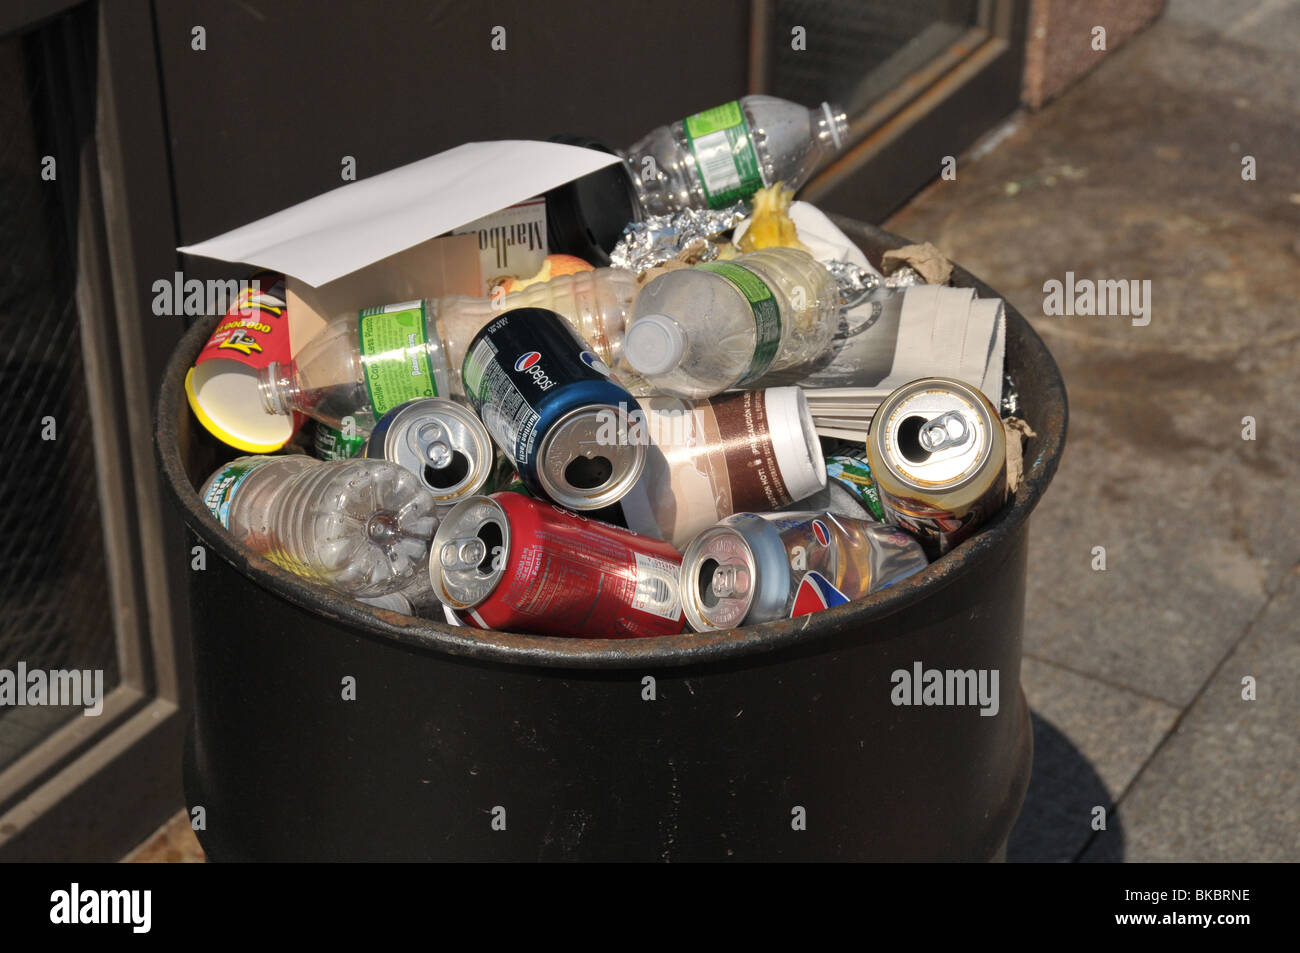 Recyclable bottles and cans in trash bin Stock Photo - Alamy